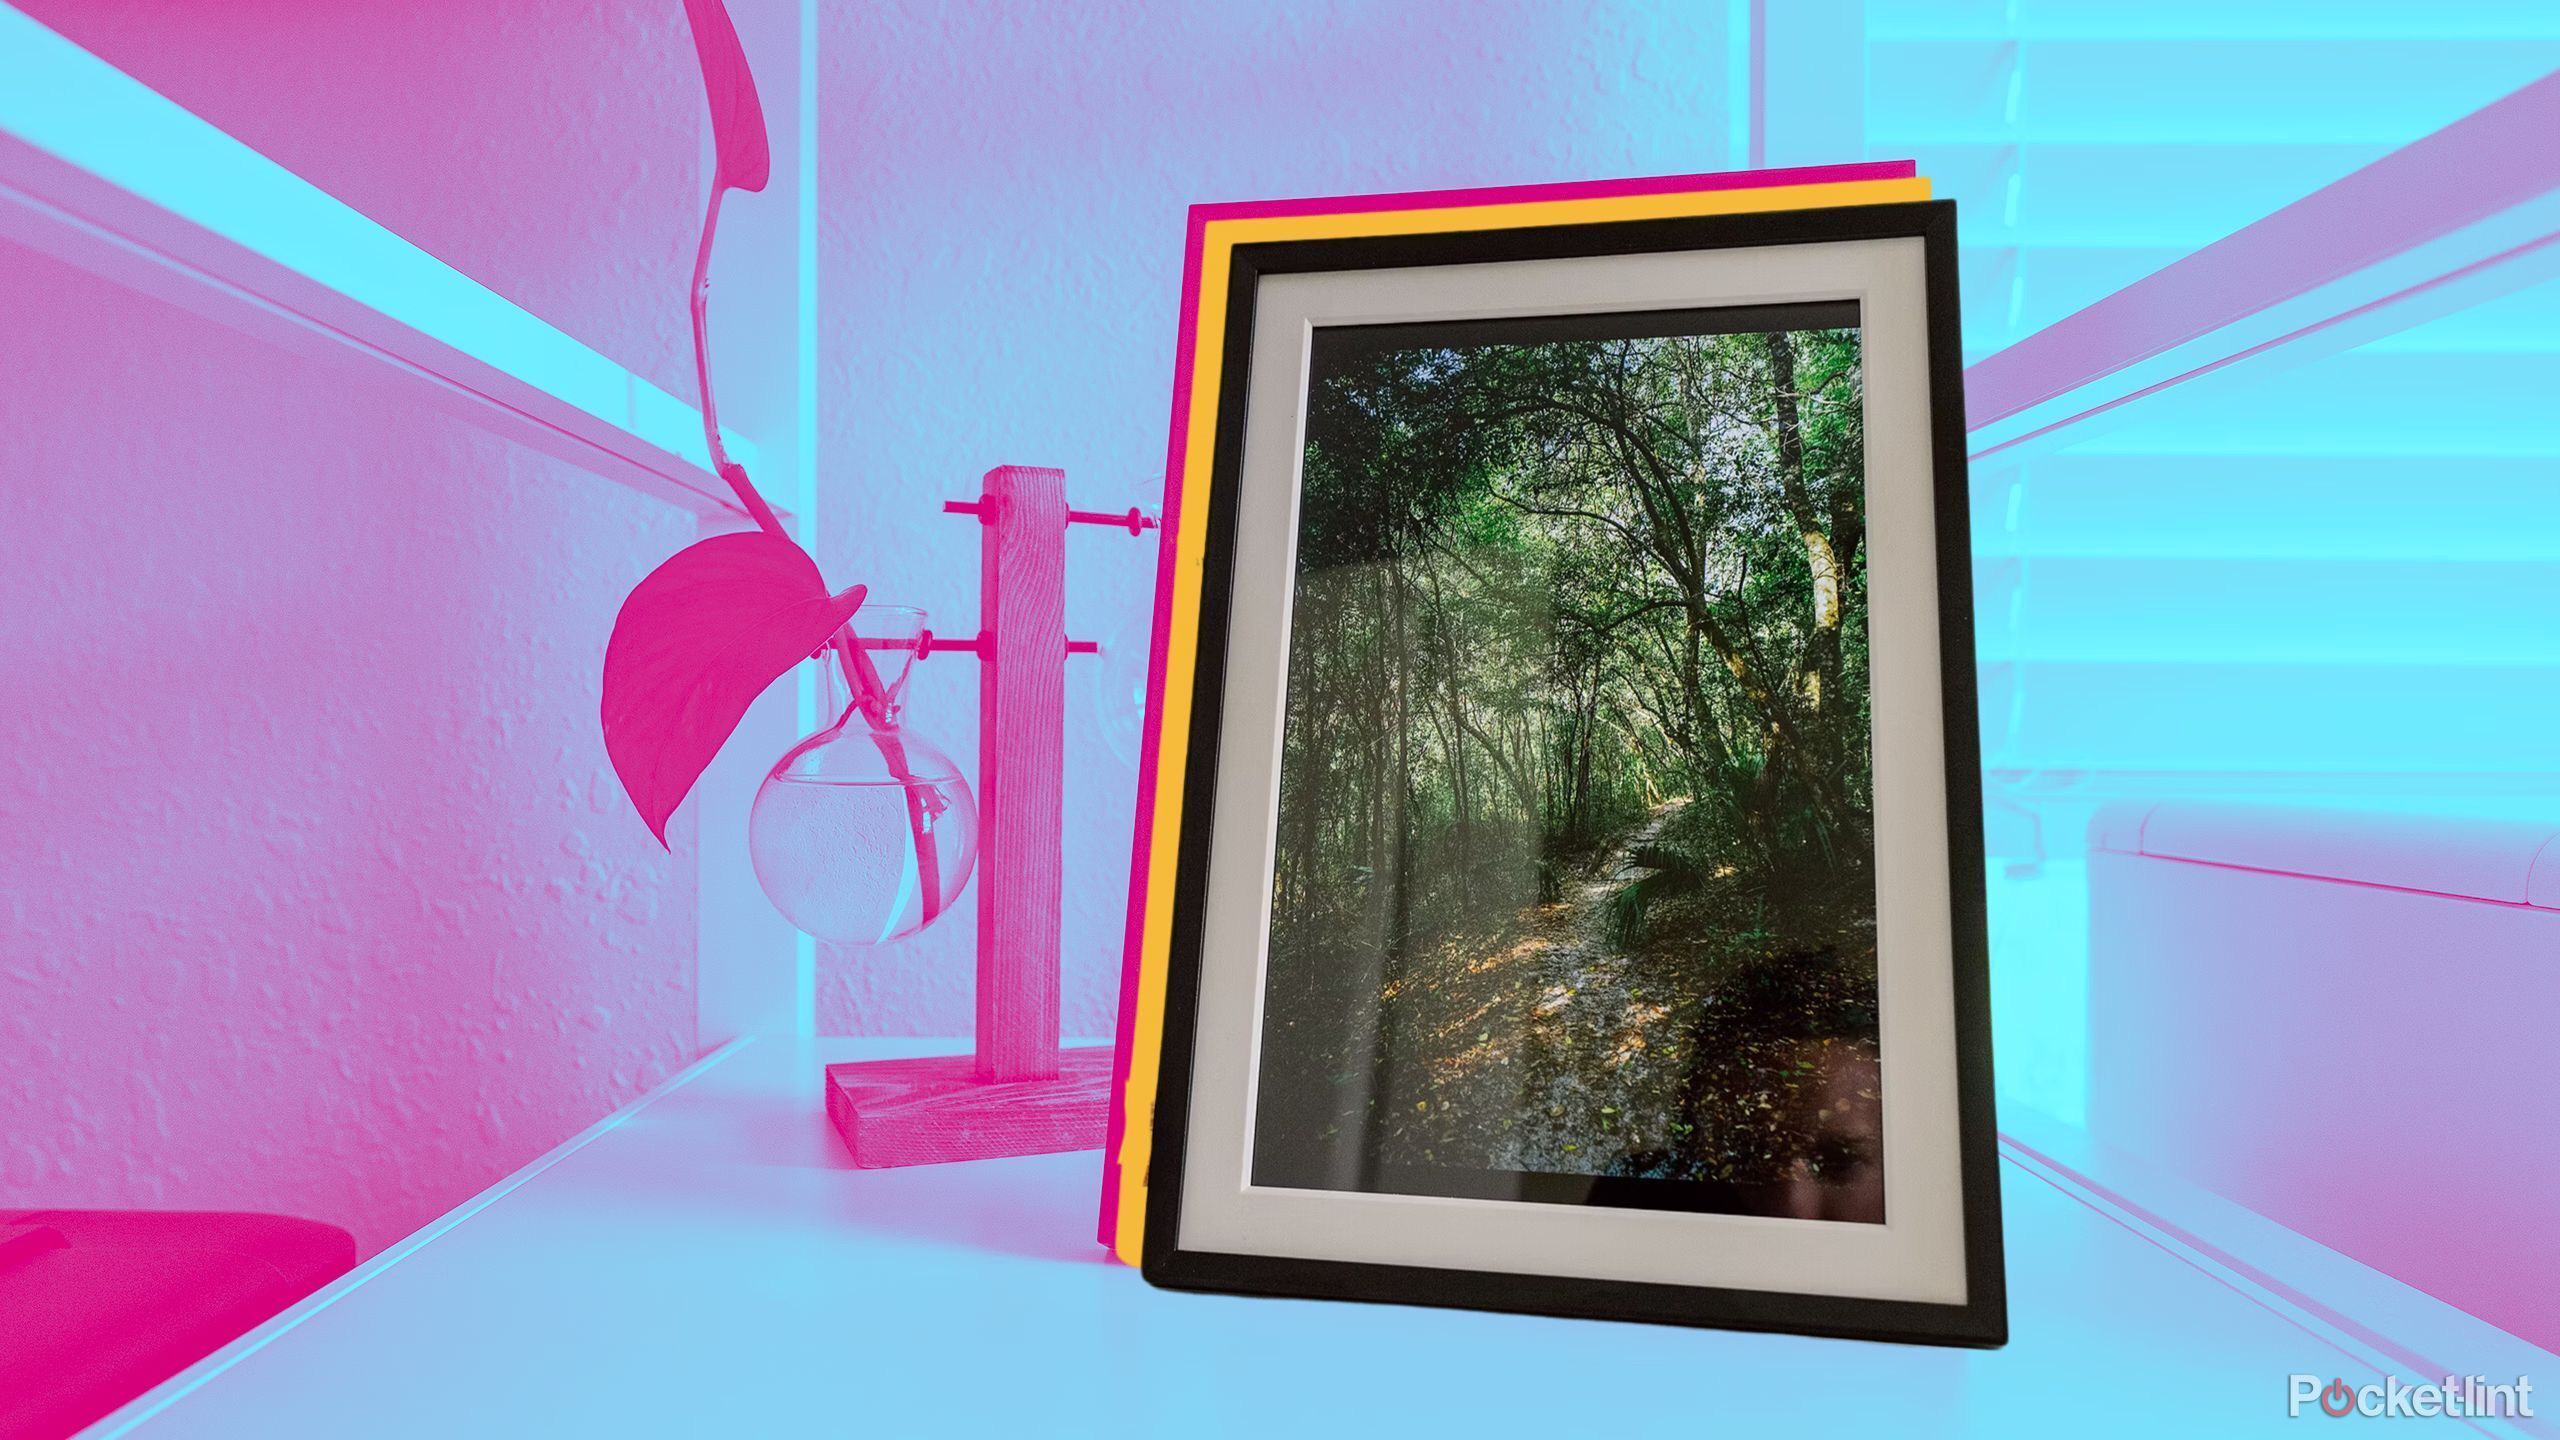 Arzopa Frameo review: Showing off photos in style